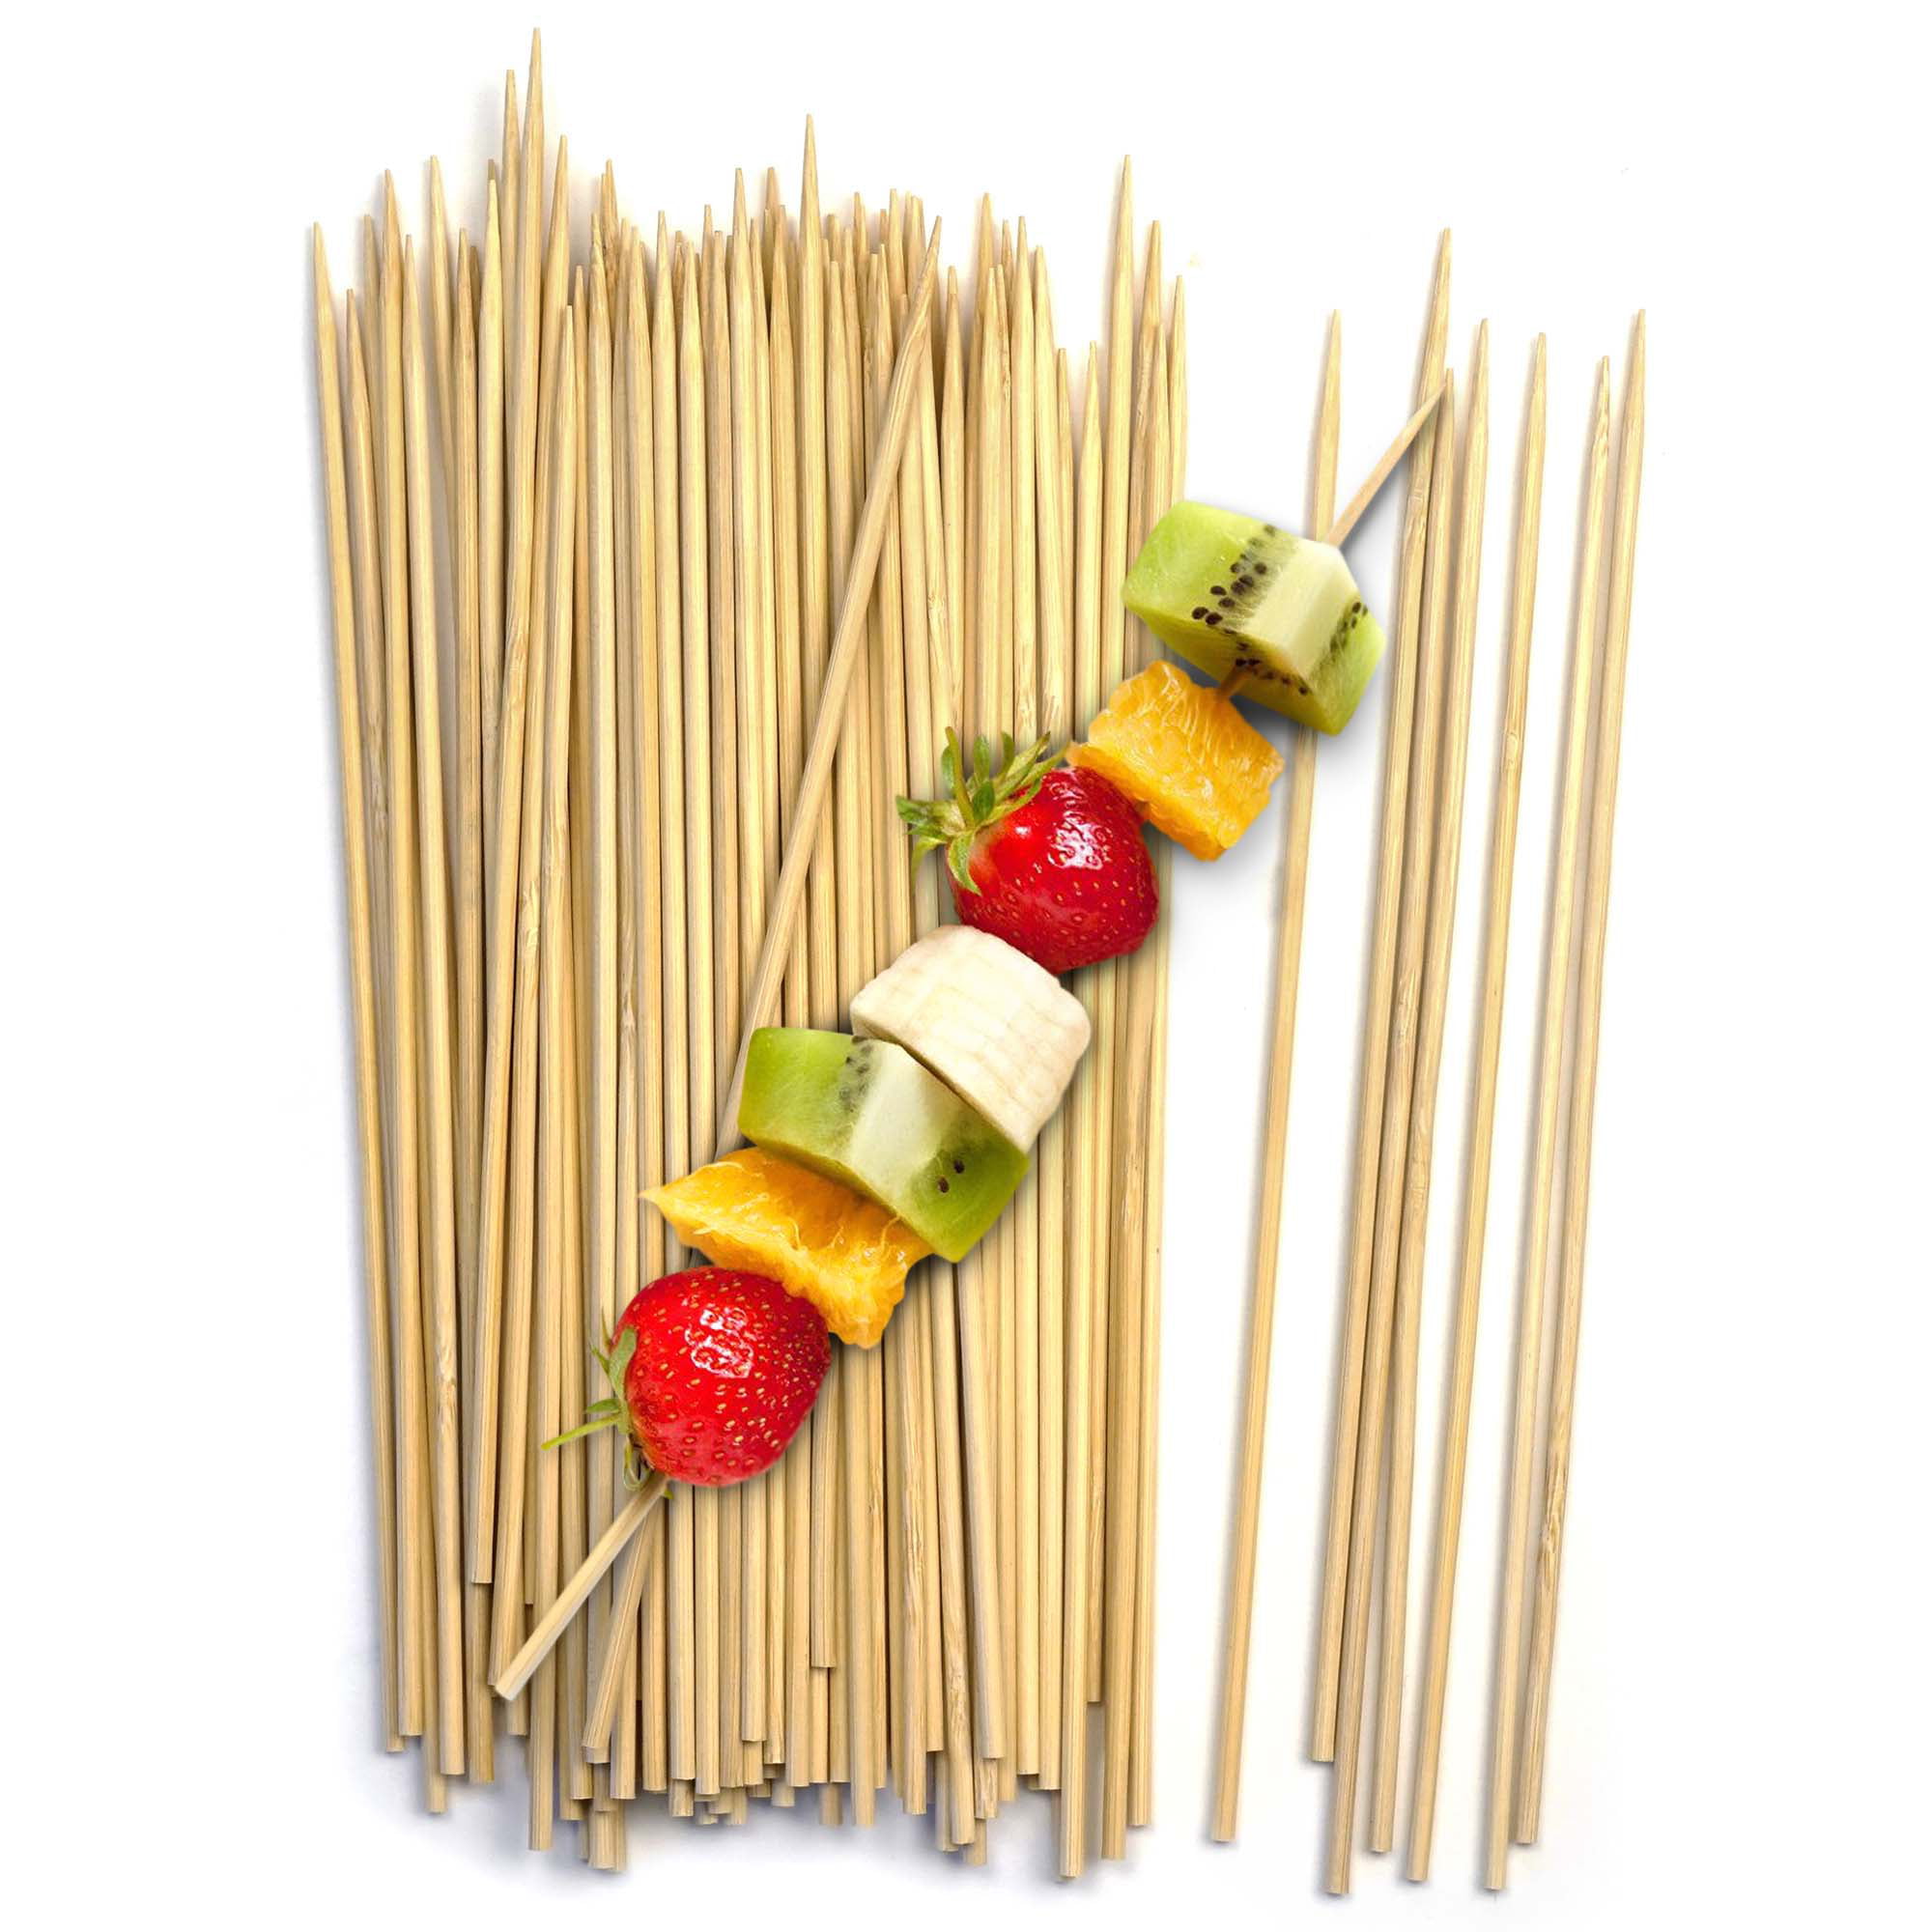 Grill Fruit 100pc 6" Bamboo Skewers Wooden BBQ Sticks for Shish Kabob